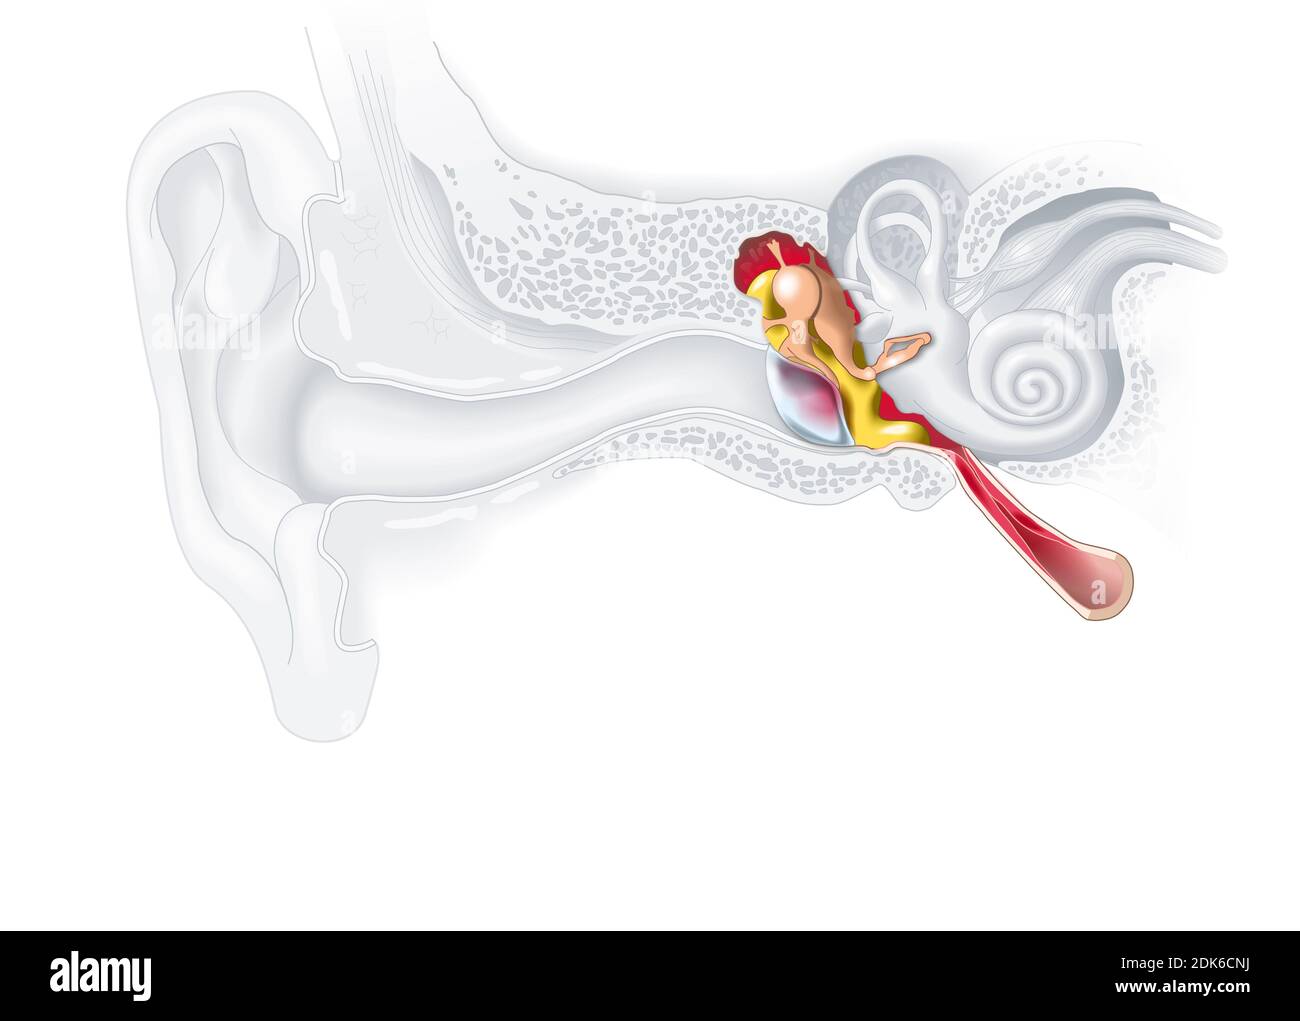 Medically illustration showing inflammation of the middle ear, otitis media Stock Photo